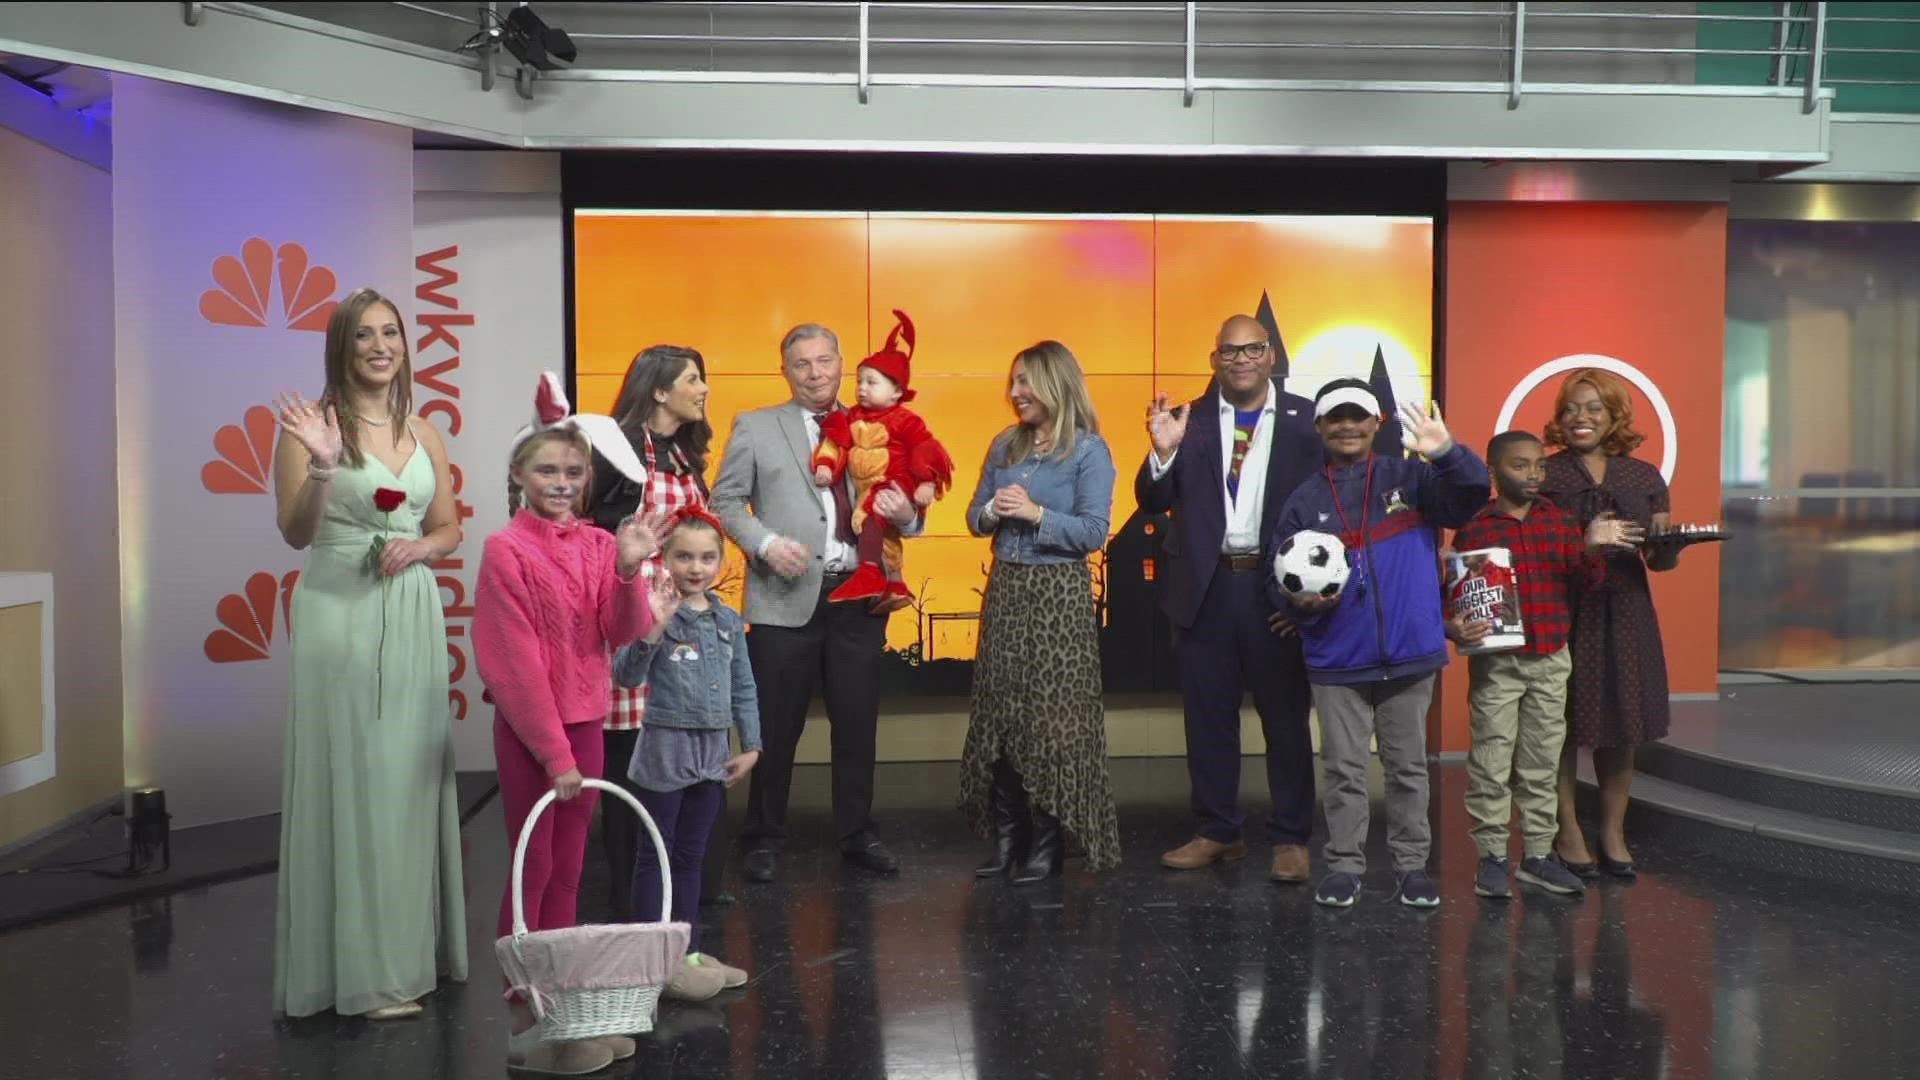 3News Style Contributor Hallie Abrams shares some easy and creative costume ideas with some help from our extended WKYC family.